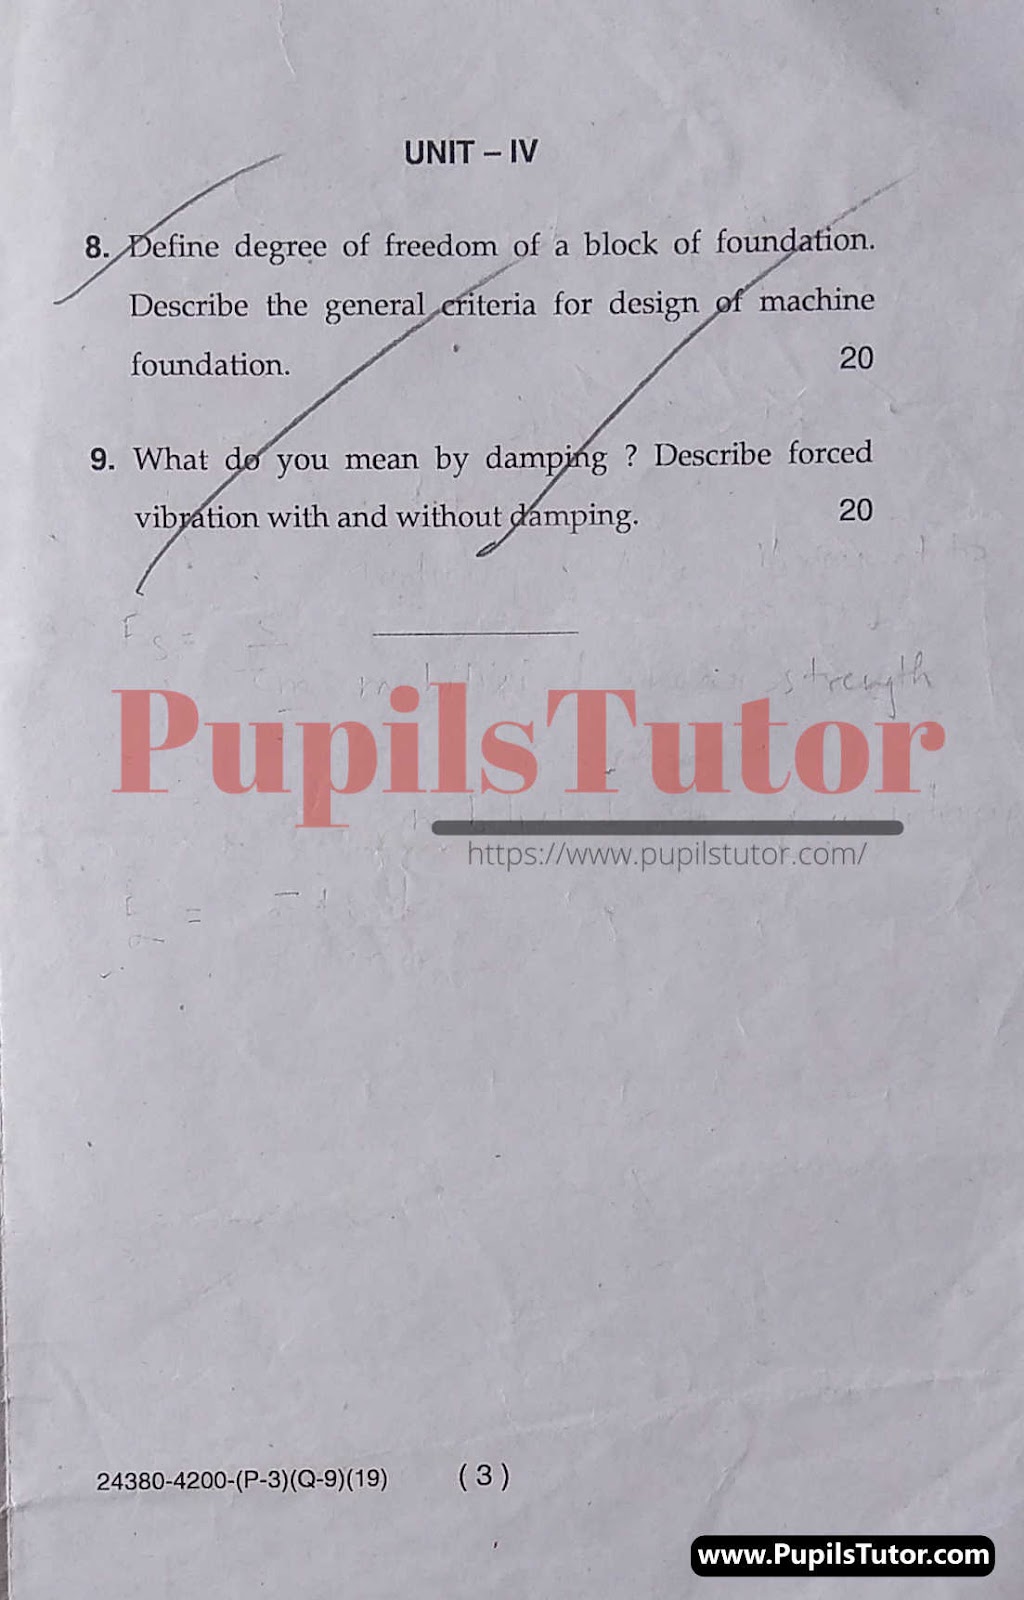 Free Download PDF Of M.D. University B.Tech (Civil) Sixth Semester Latest Question Paper For Geotechnology Subject (Page 3) - https://www.pupilstutor.com